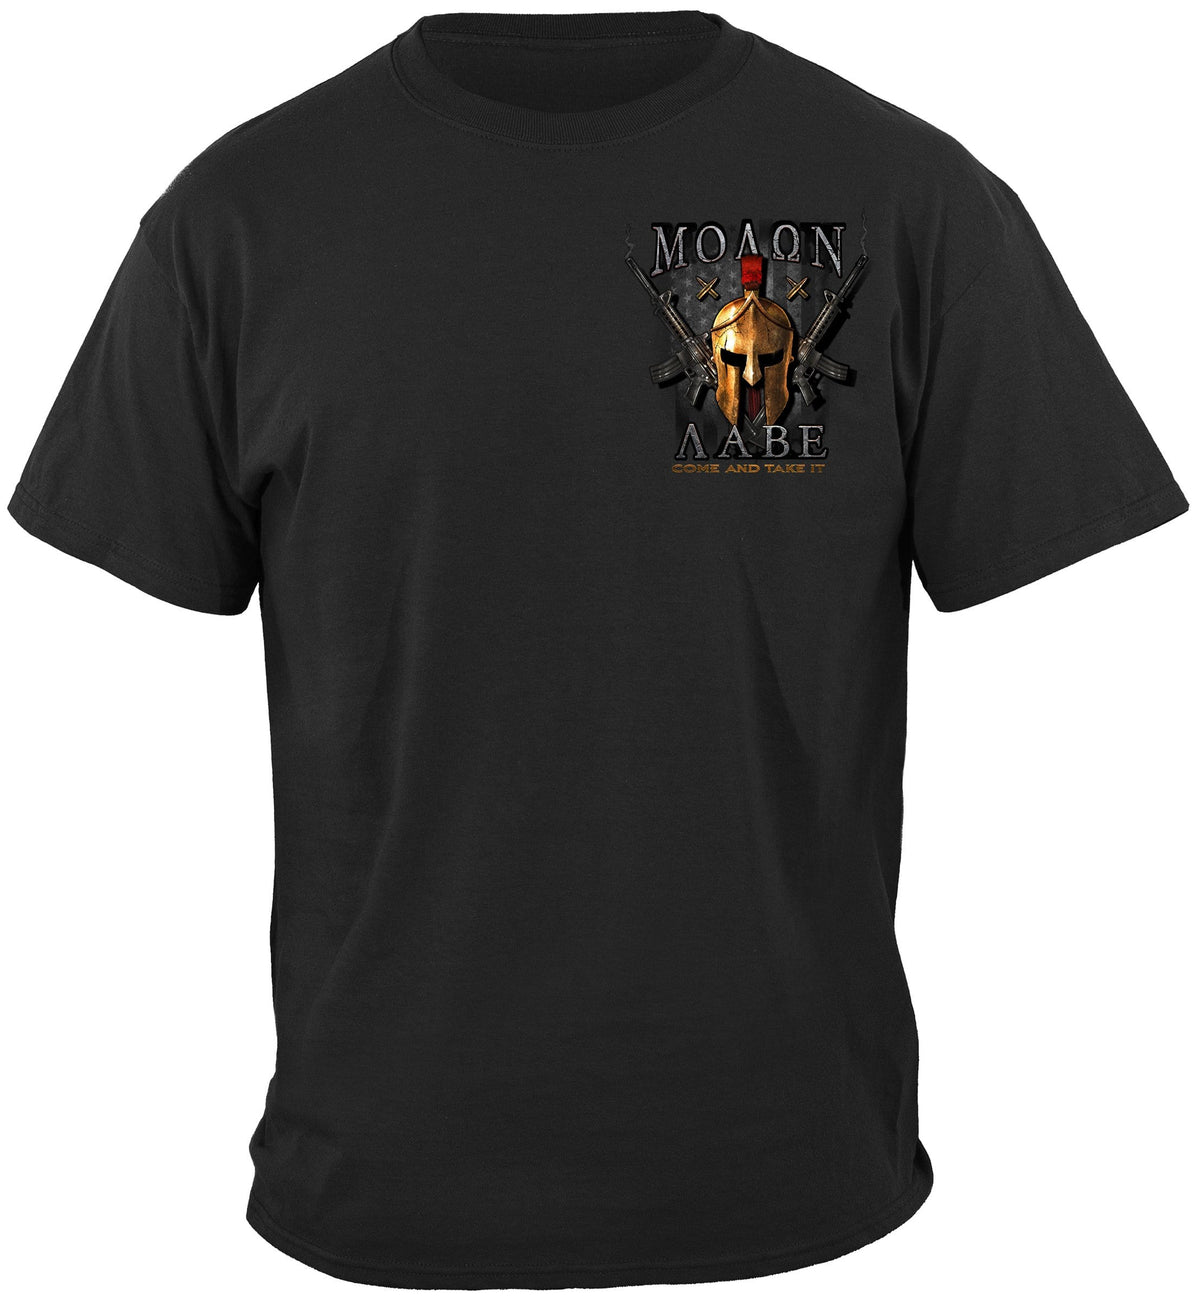 Molon Labe T-Shirt with *FREE DECAL worth $7.95*